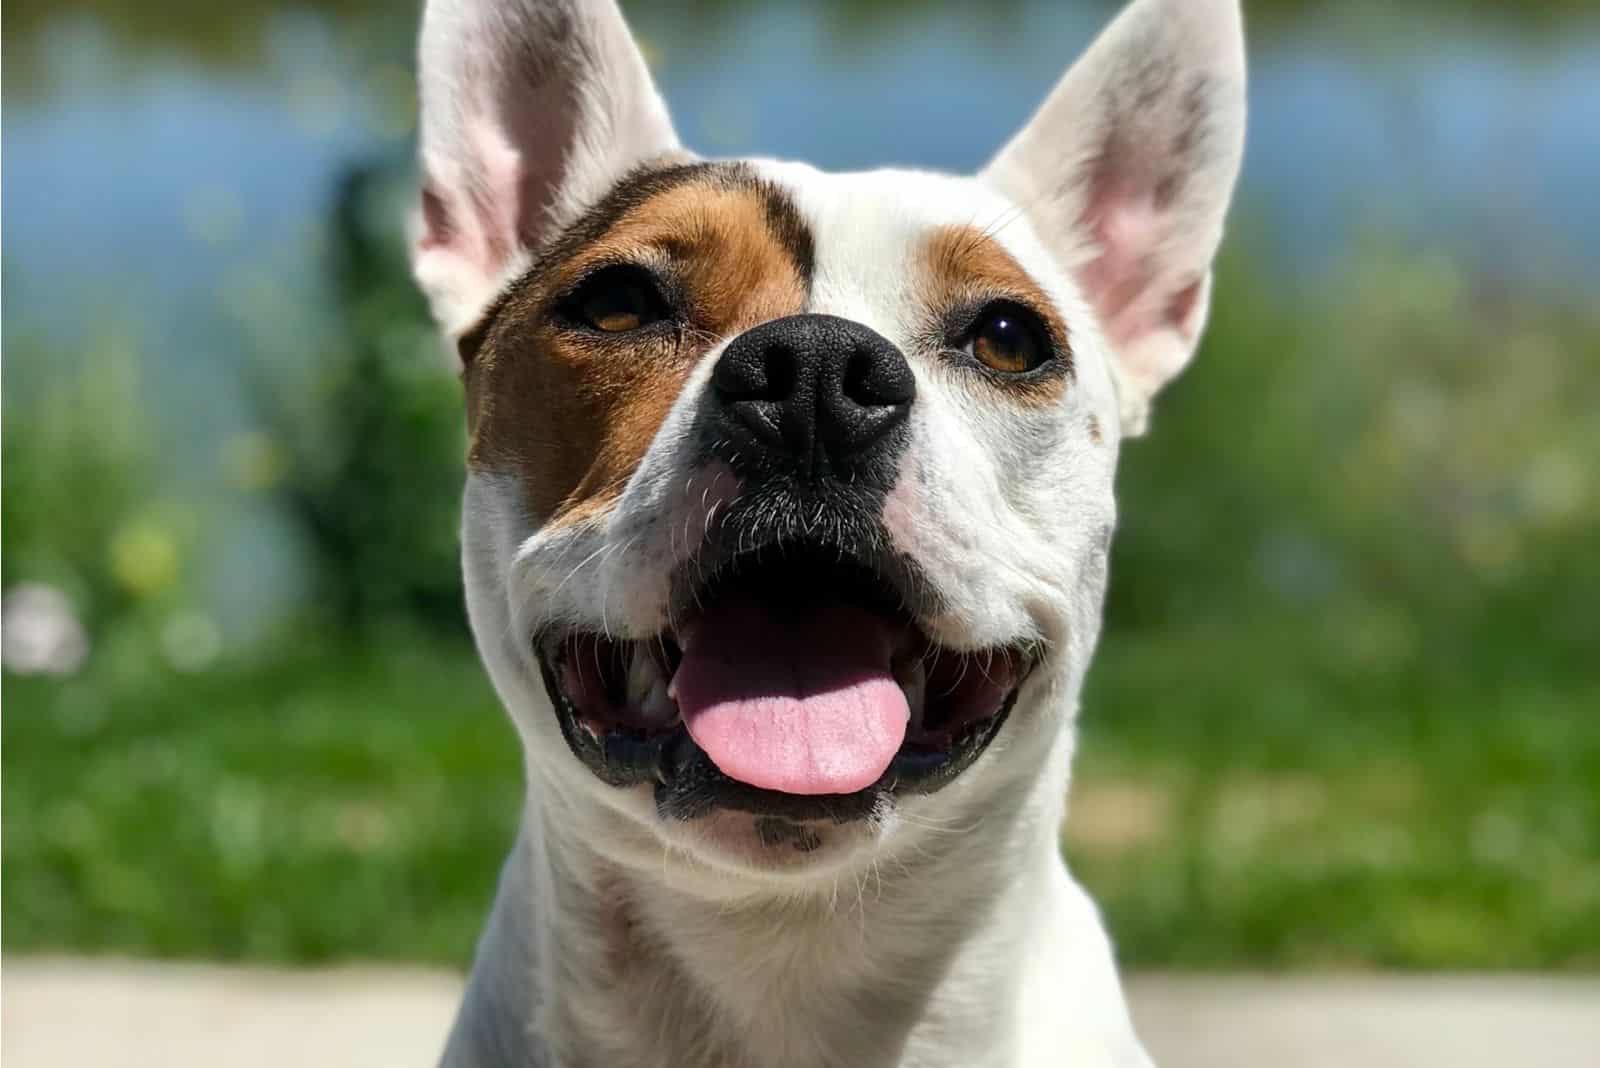 Pit bull and corgi mix might just be the cutest thing on earth.